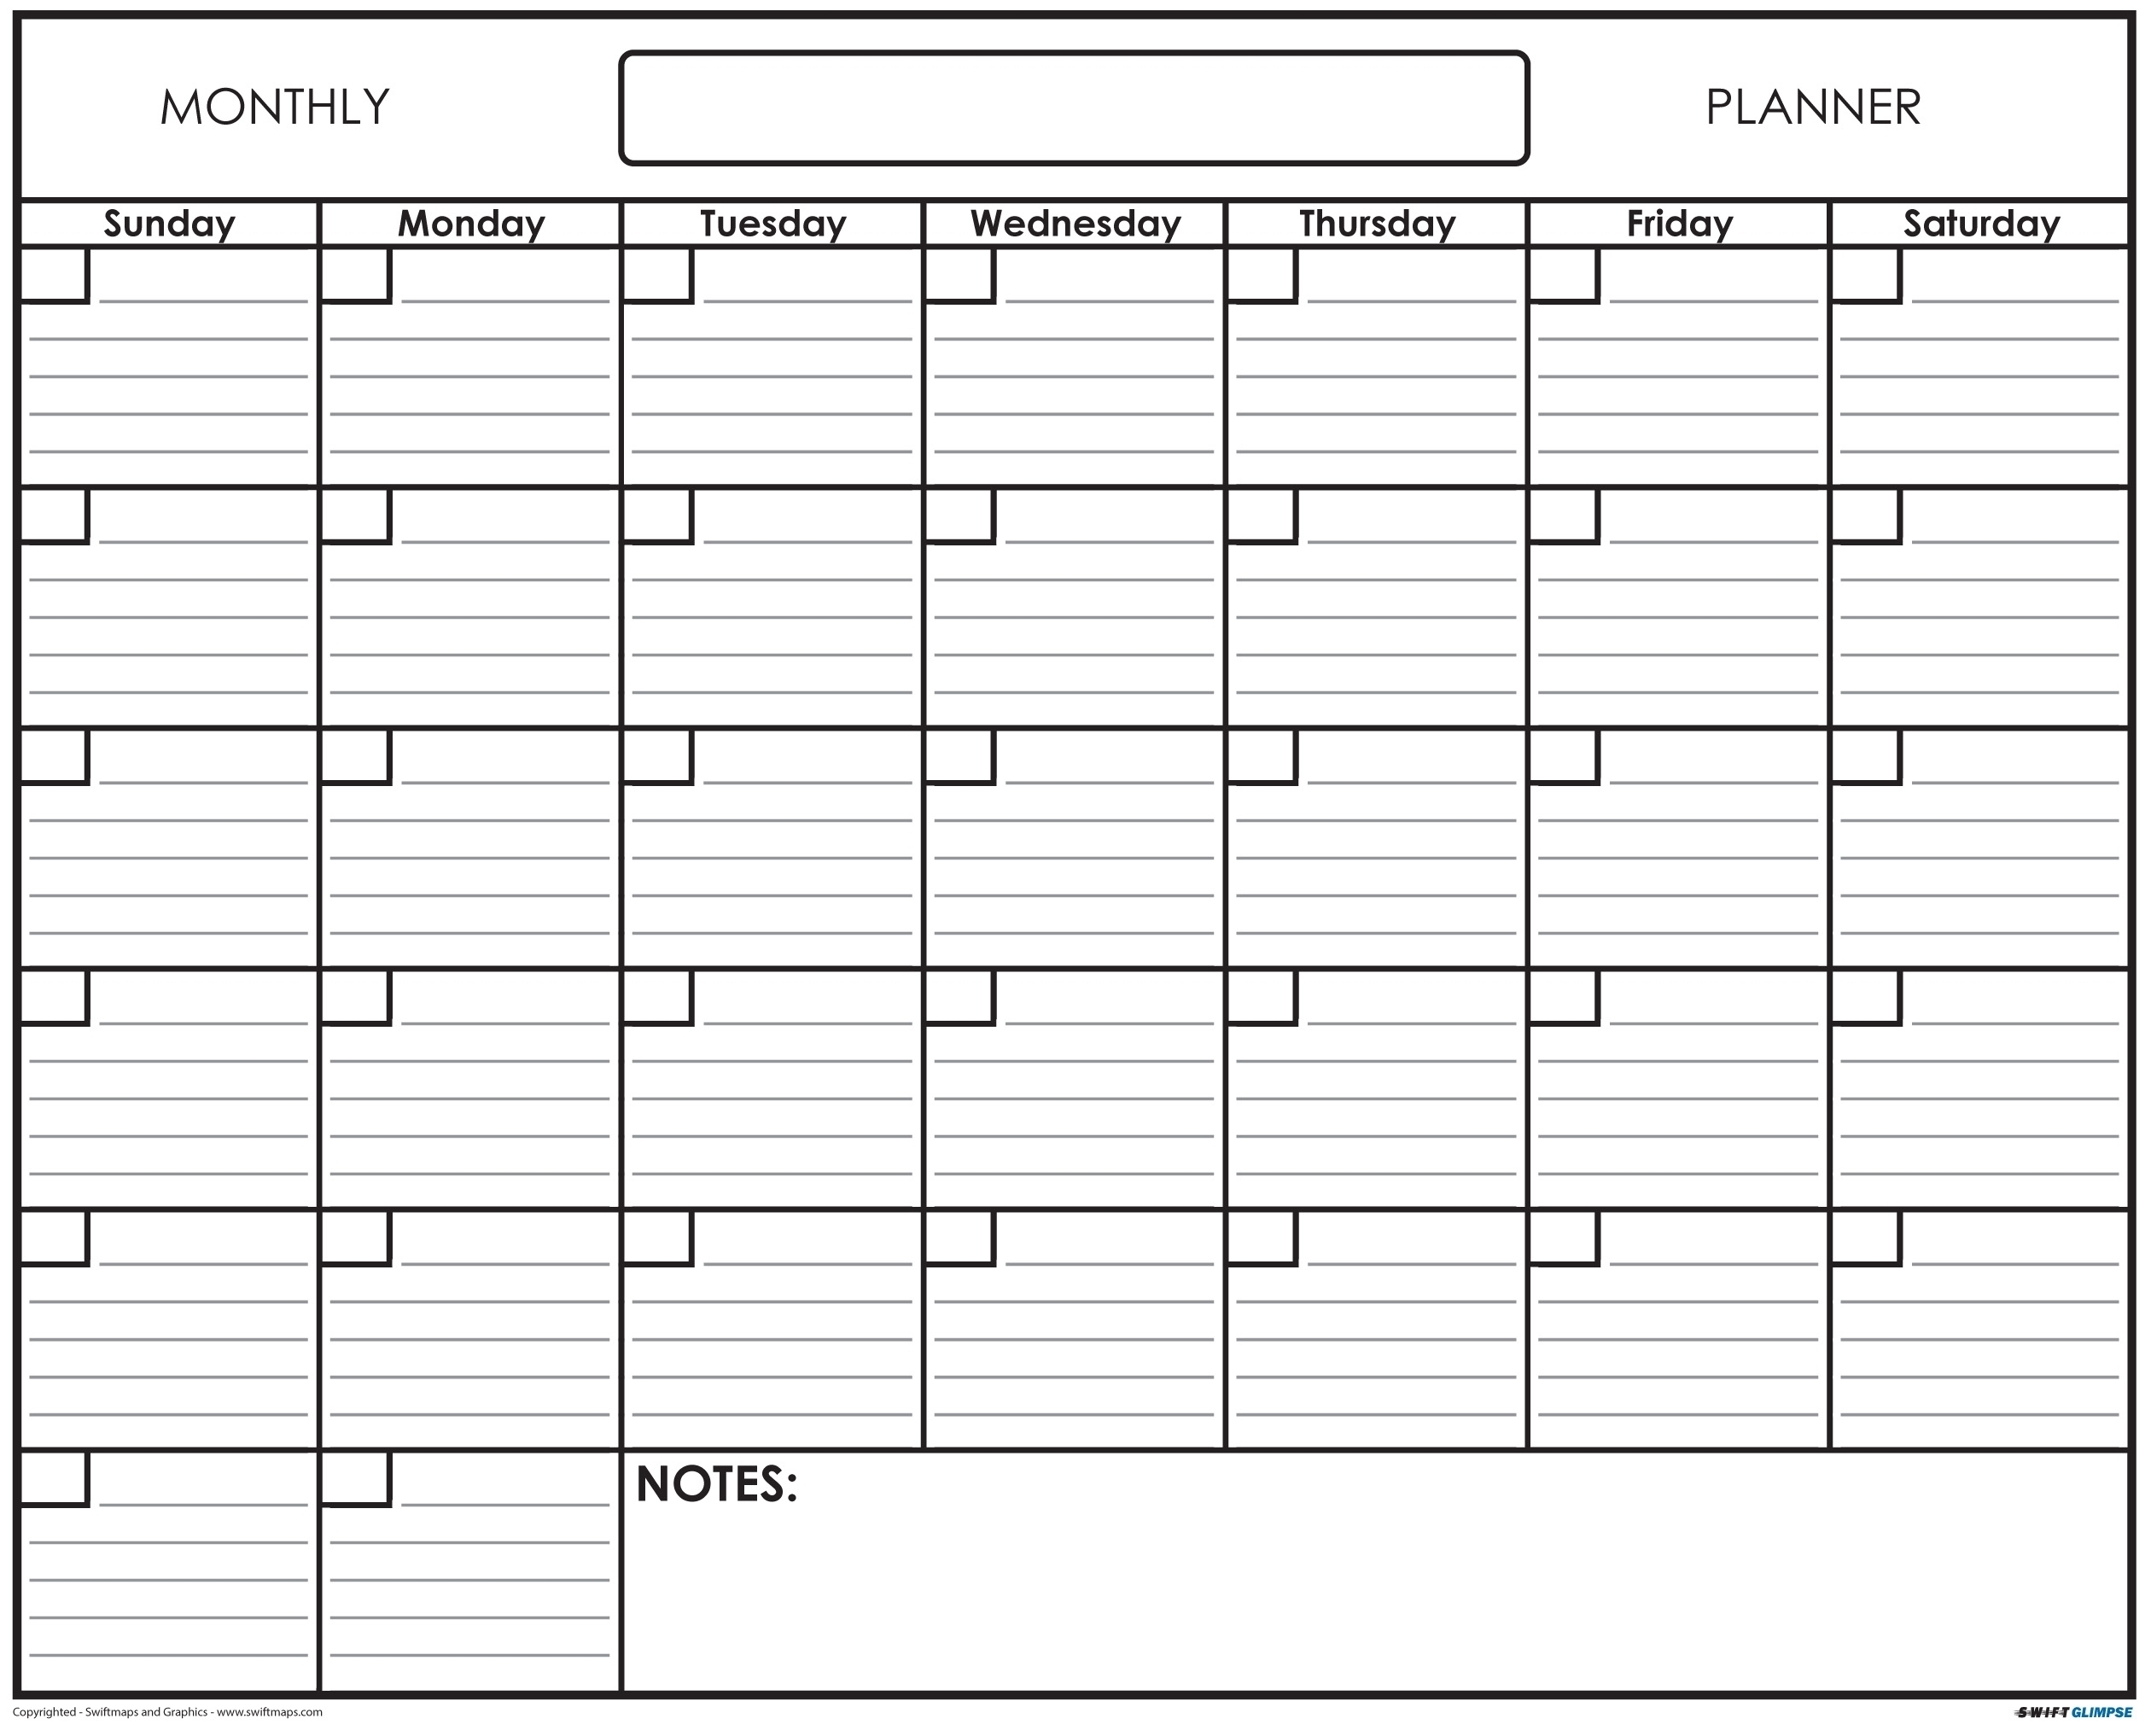 Blank Monthly Calendar With Lines | Template Calendar Printable within Printable Monthly Calendar With Lines